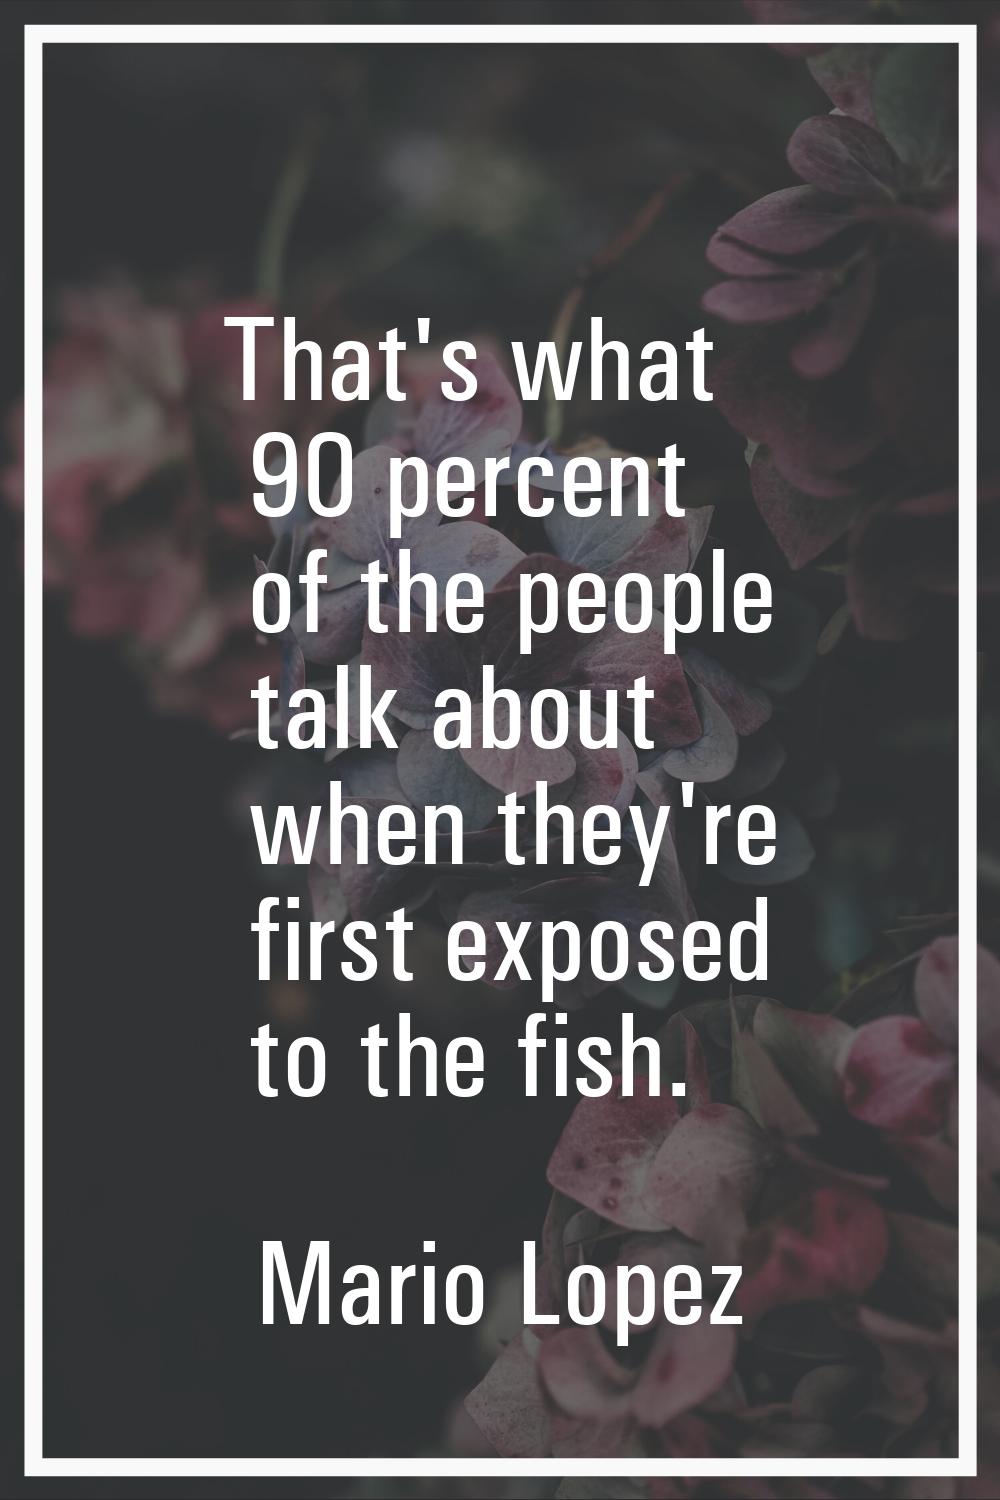 That's what 90 percent of the people talk about when they're first exposed to the fish.